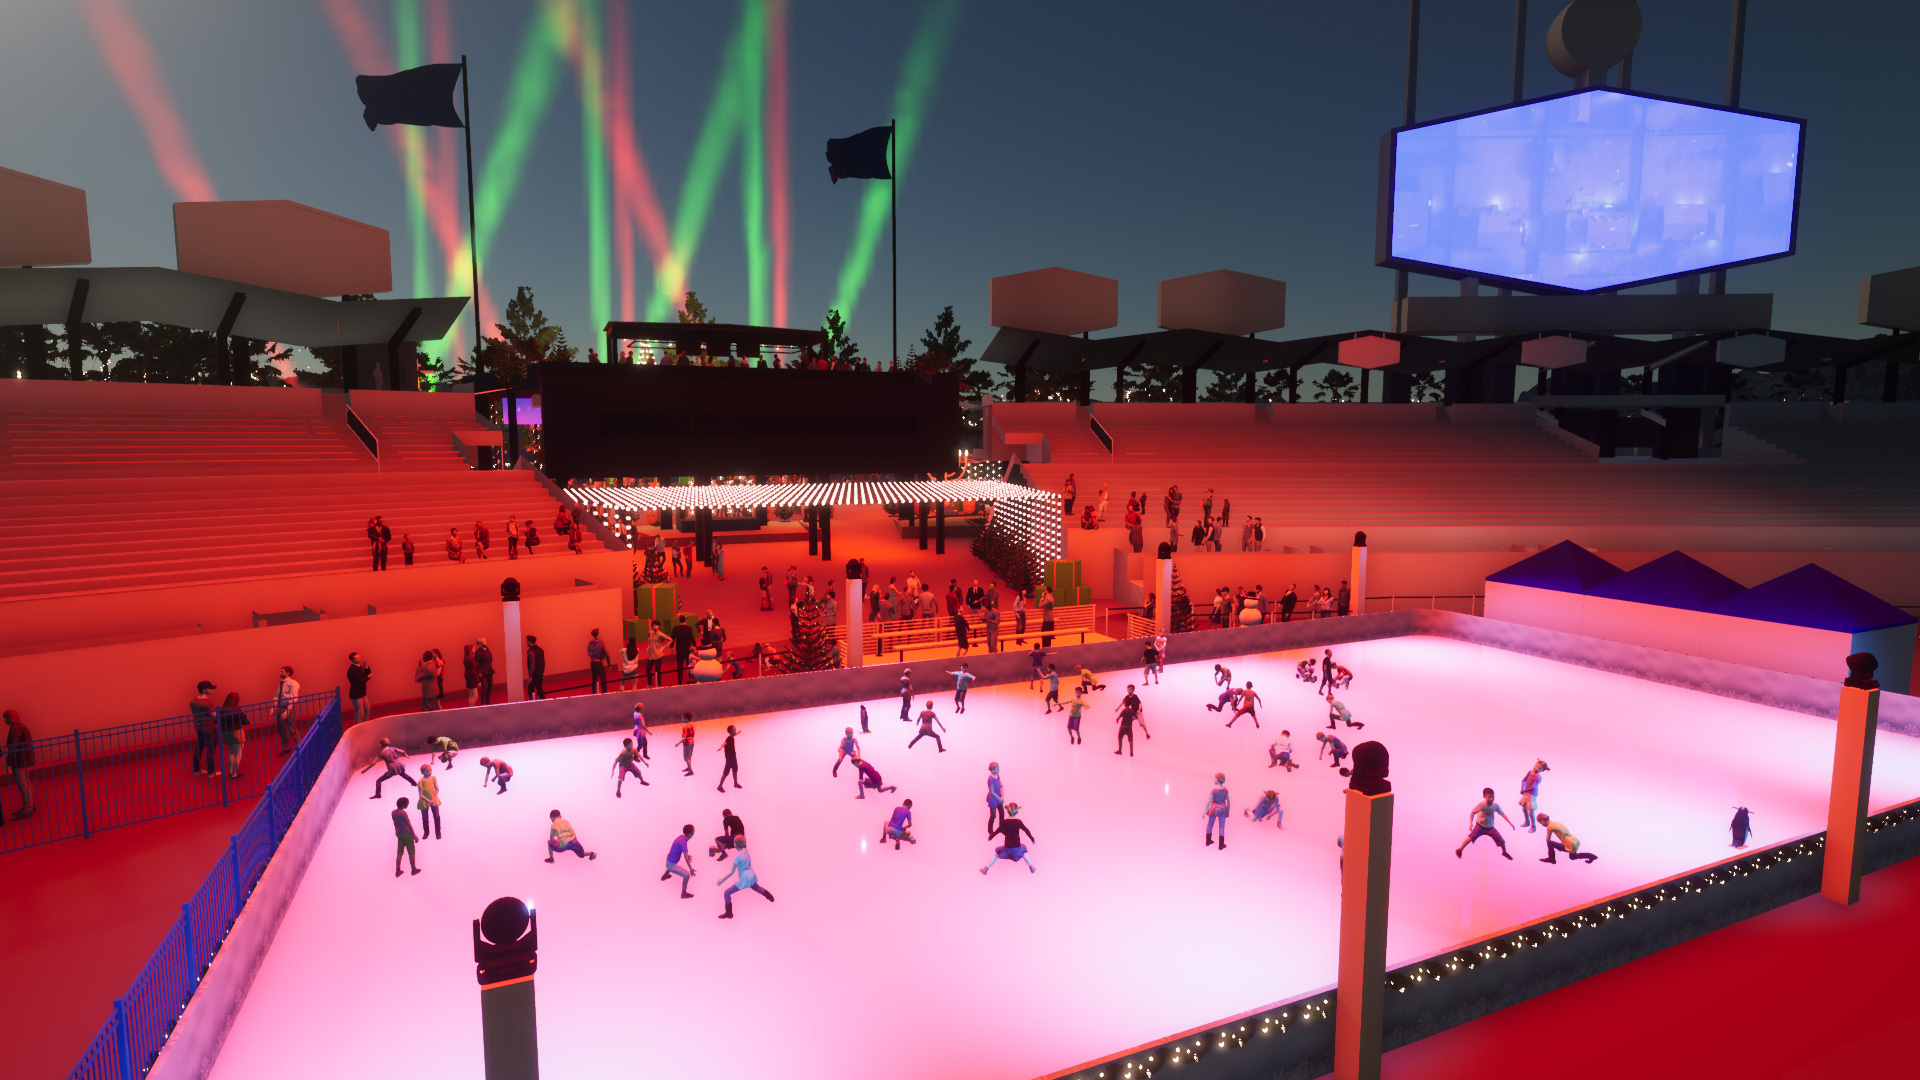 Making ice at Dodger Stadium coolest gig in the game - The Globe and Mail